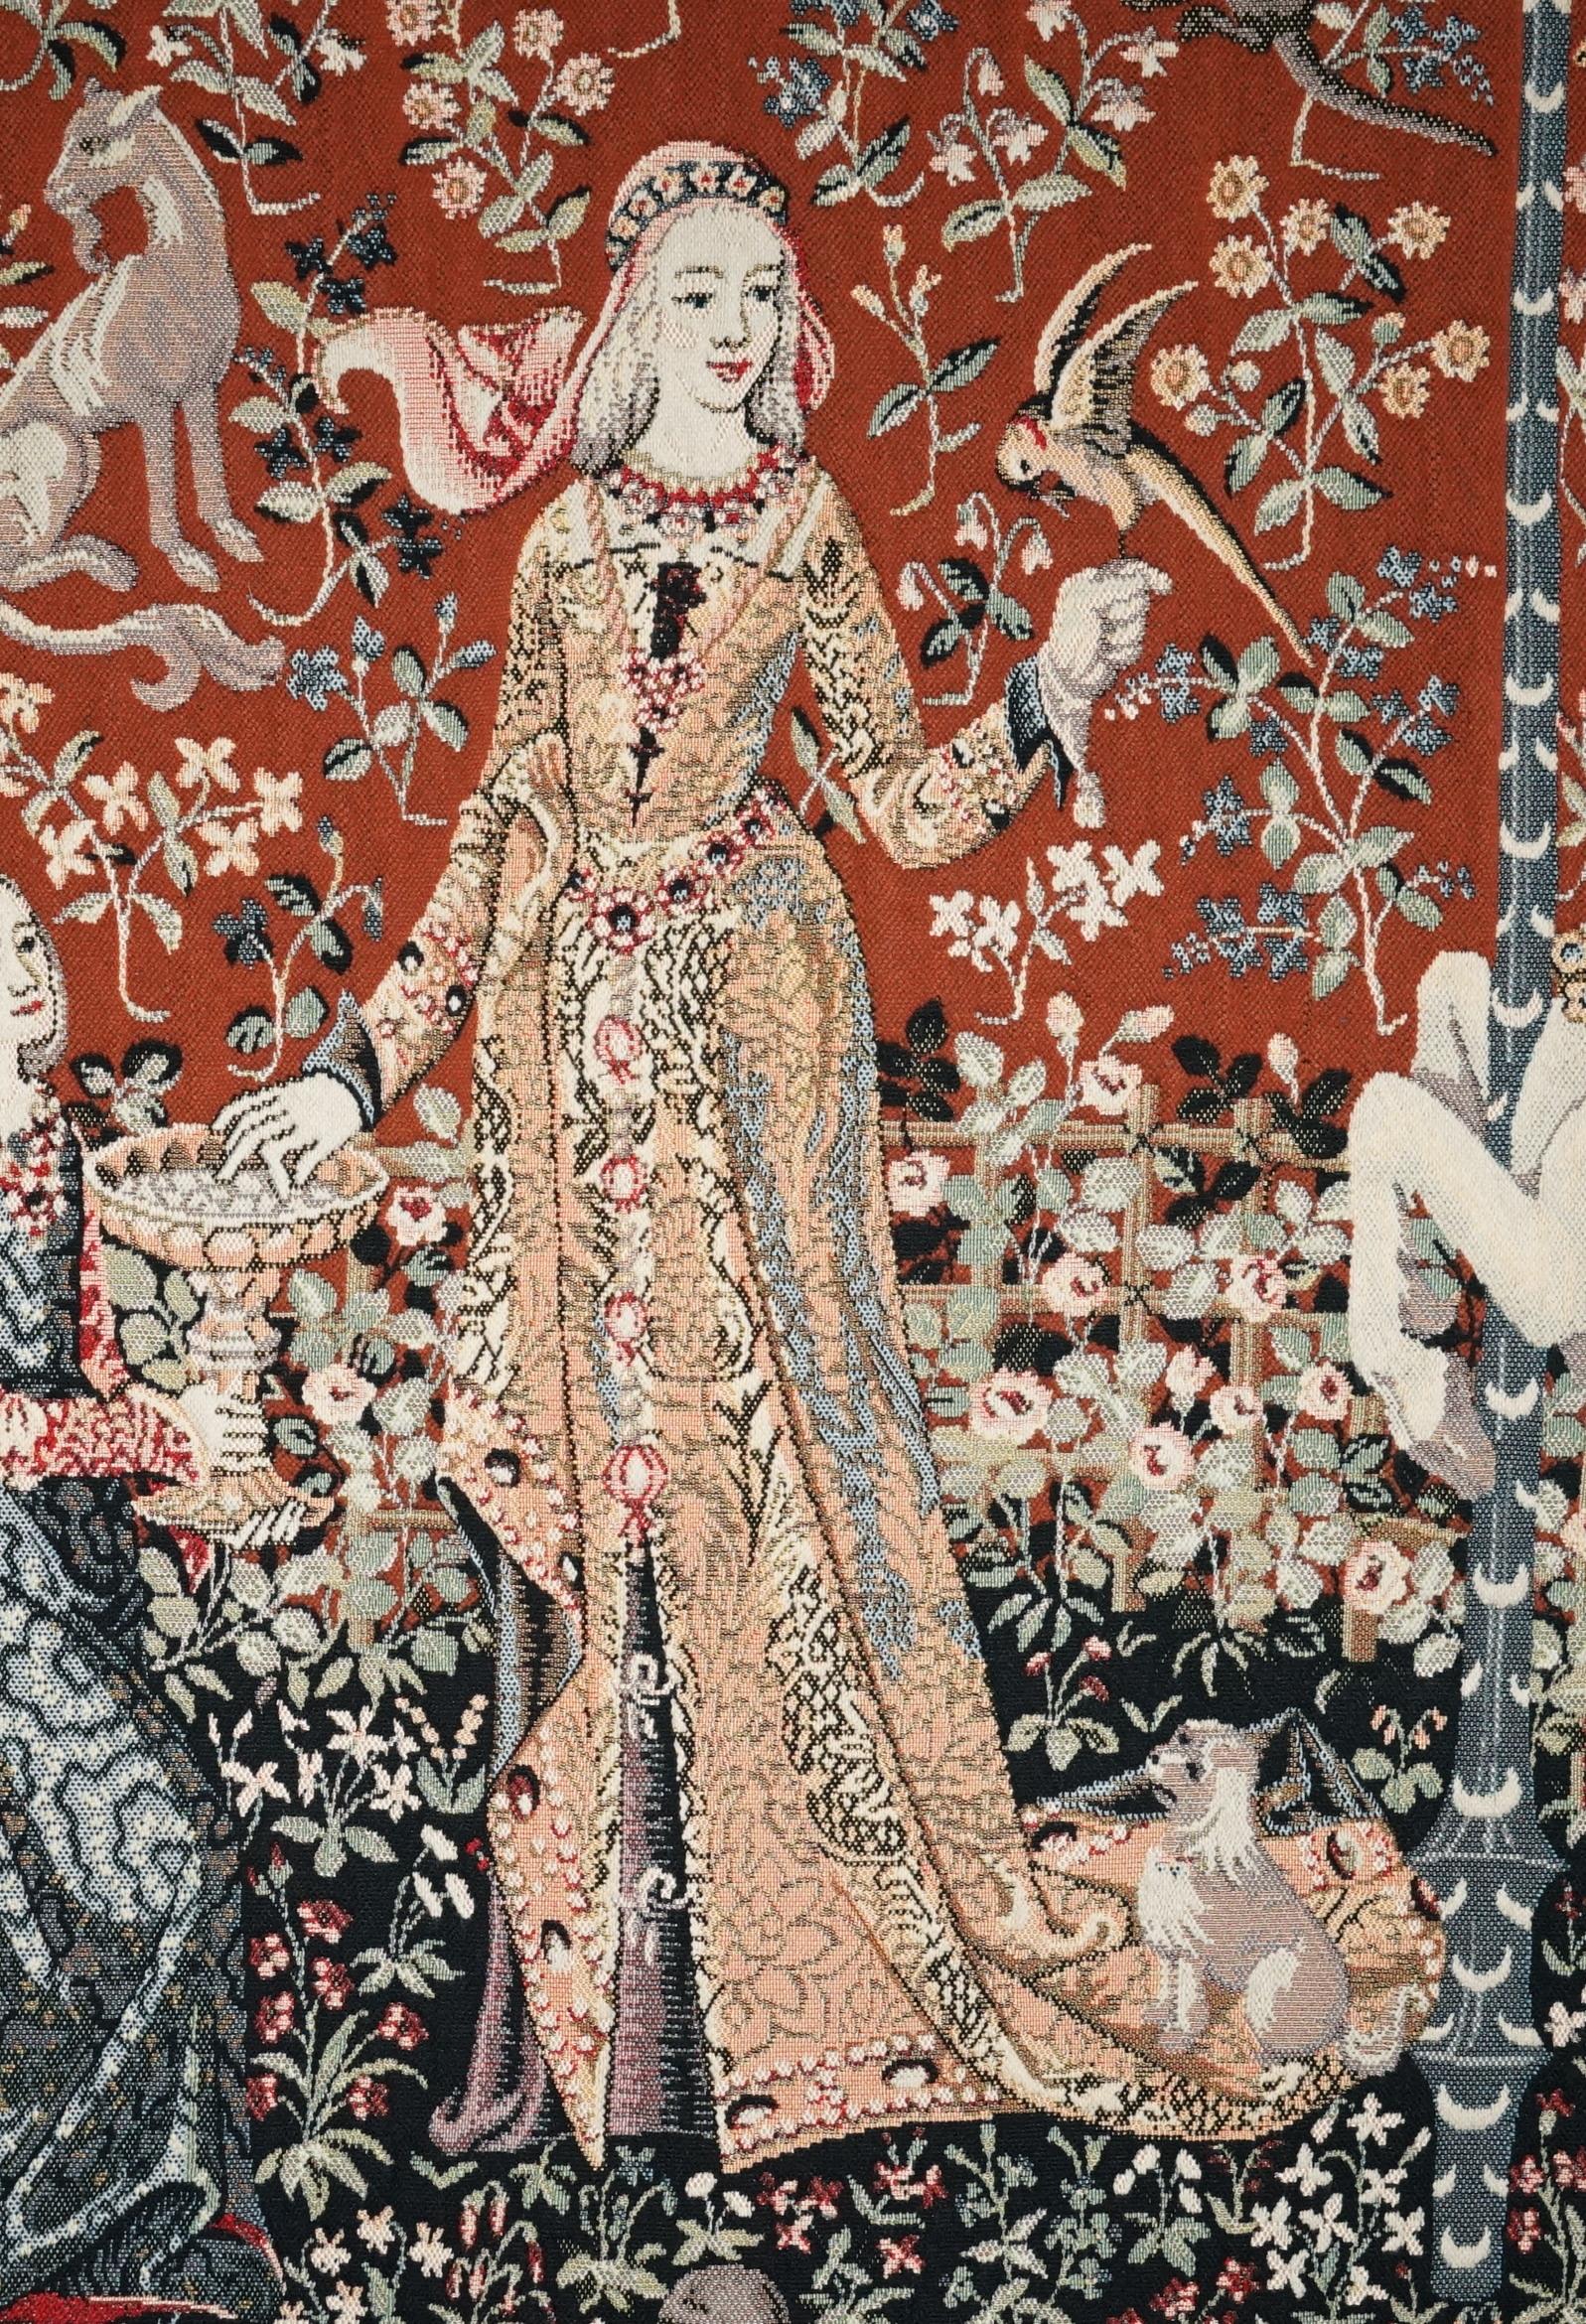 Early 20th Century ViNTAGE THE LADY AND THE UNICORN LARGE WALL HANGING WOVEN TAPESTRY 216CM X 189CM